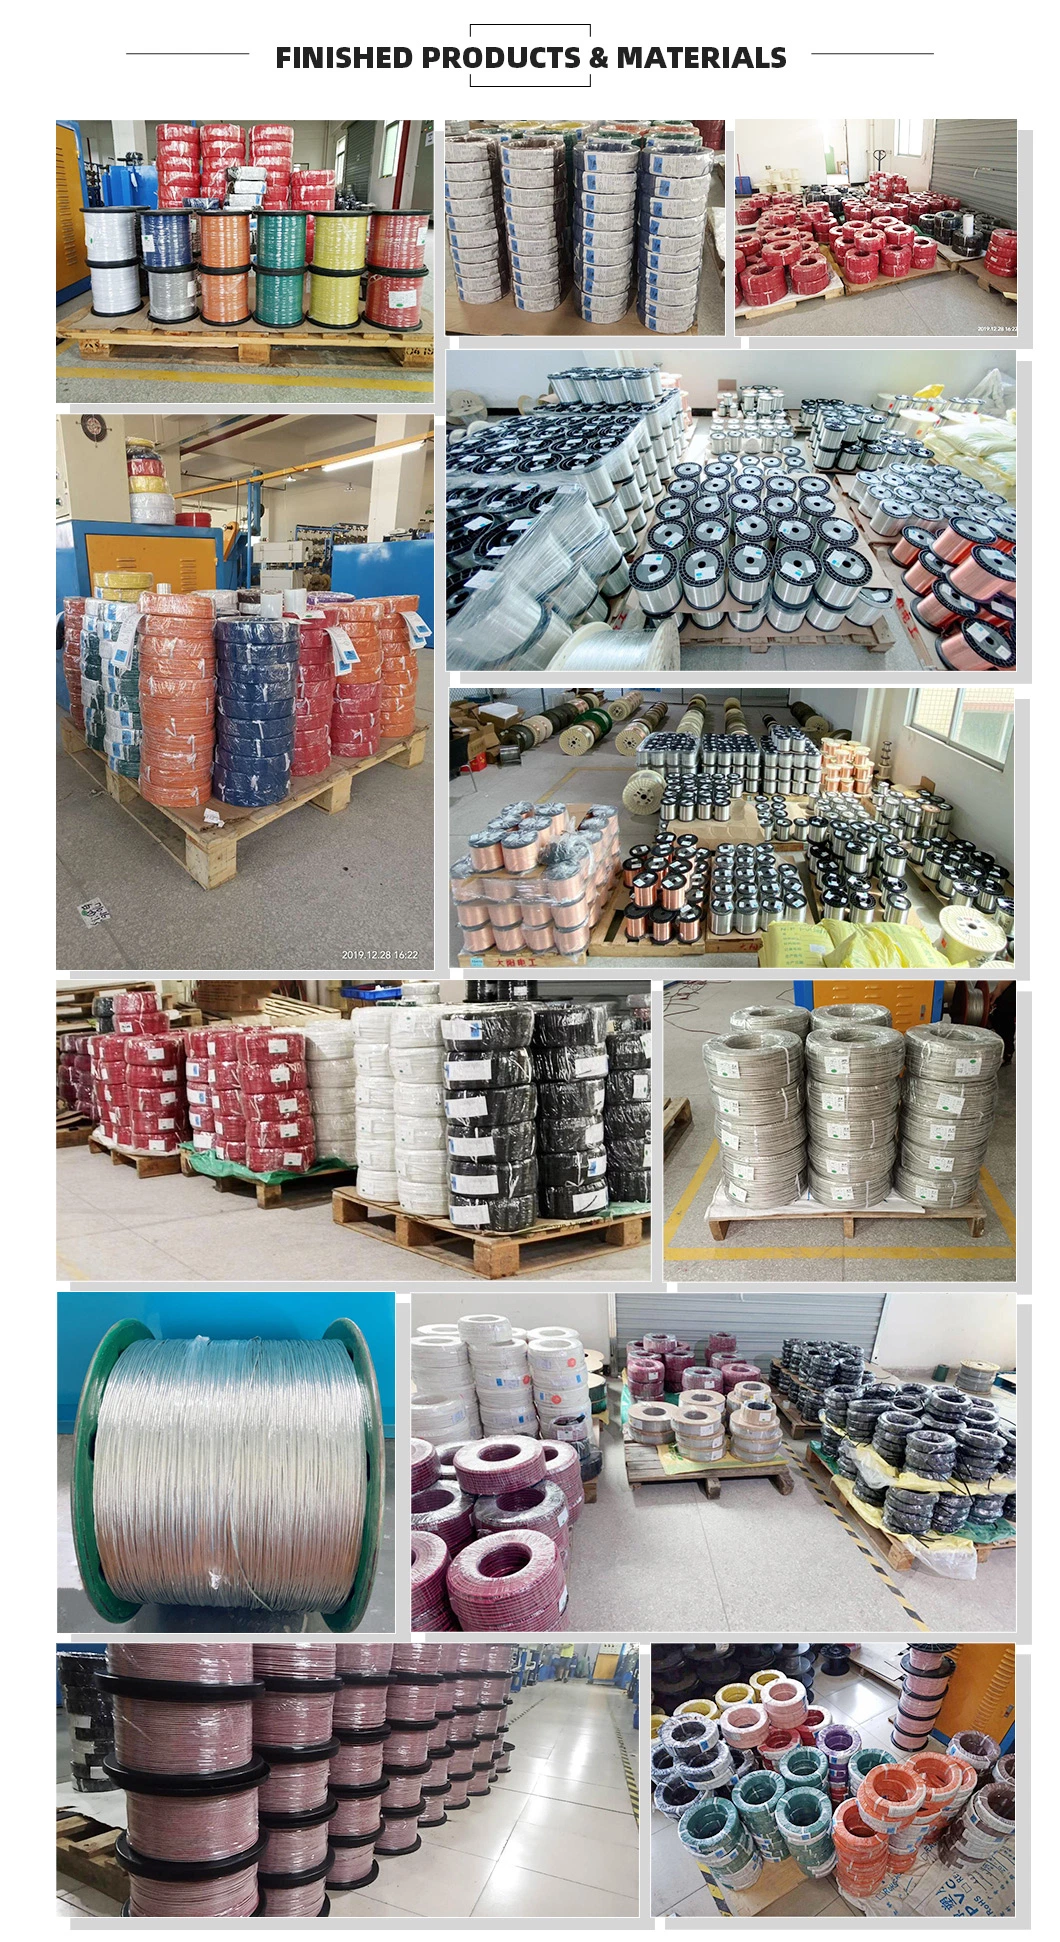 Hot 0.5mm 0.75mm 1mm 1.5mm 2.5mm 4mm 6mm 10mm Single Core Copper PVC / FEP / PE / XLPE / Silicone Cable Wiring Electrical Cable and Wire Price Cable